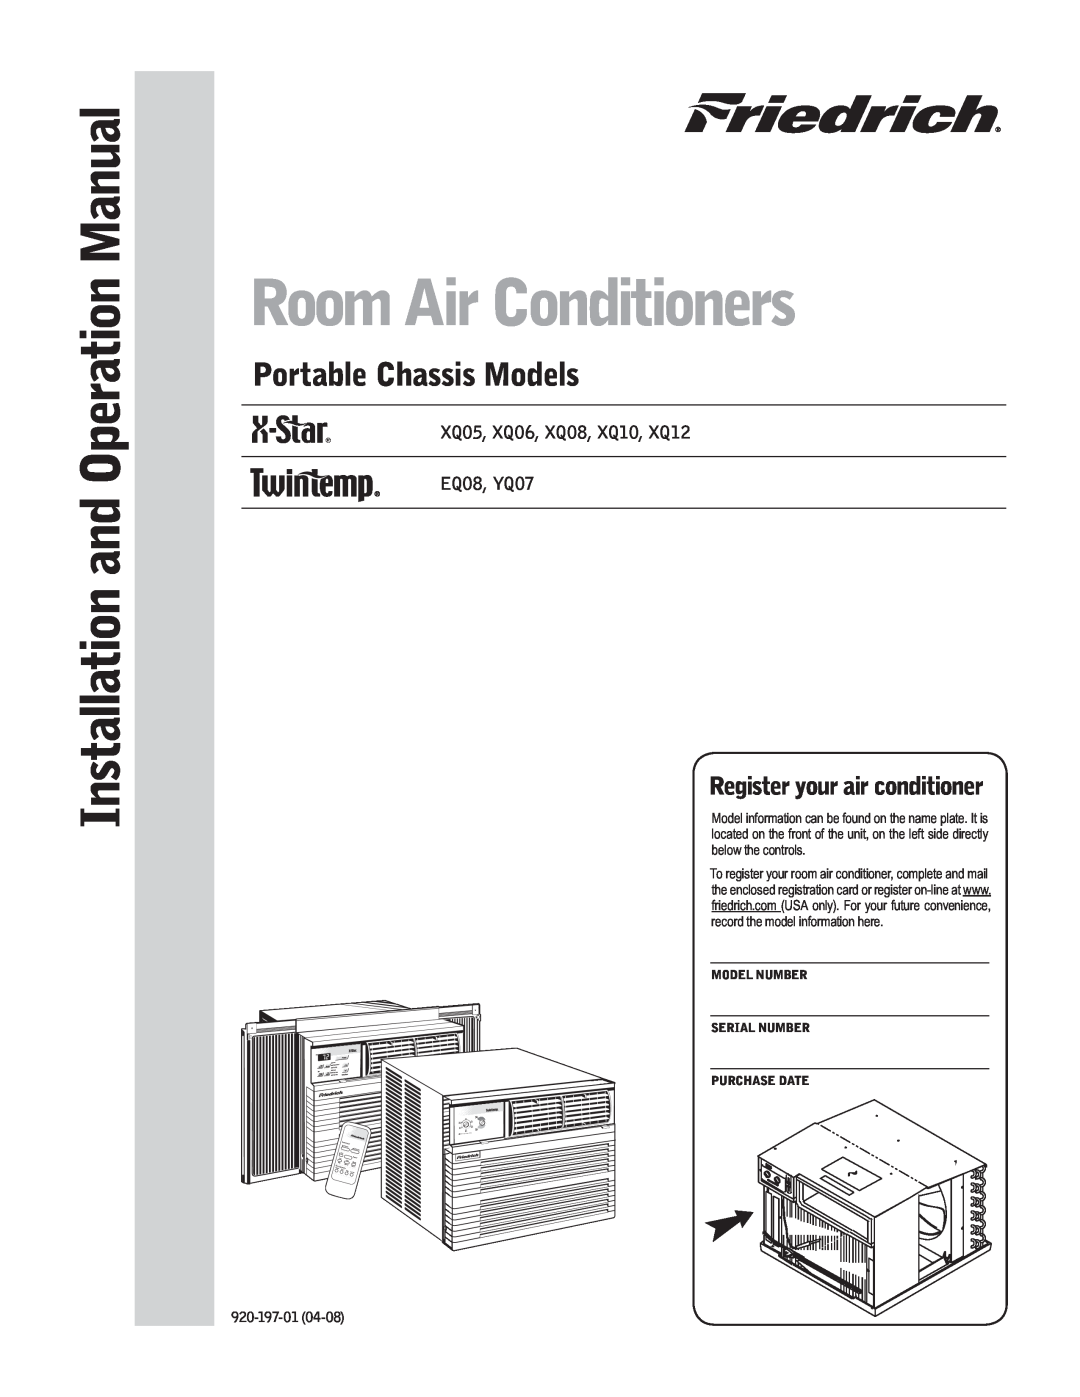 Friedrich EQ08 operation manual Room Air Conditioners, Portable Chassis Models, Register your air conditioner, 920-197-01 